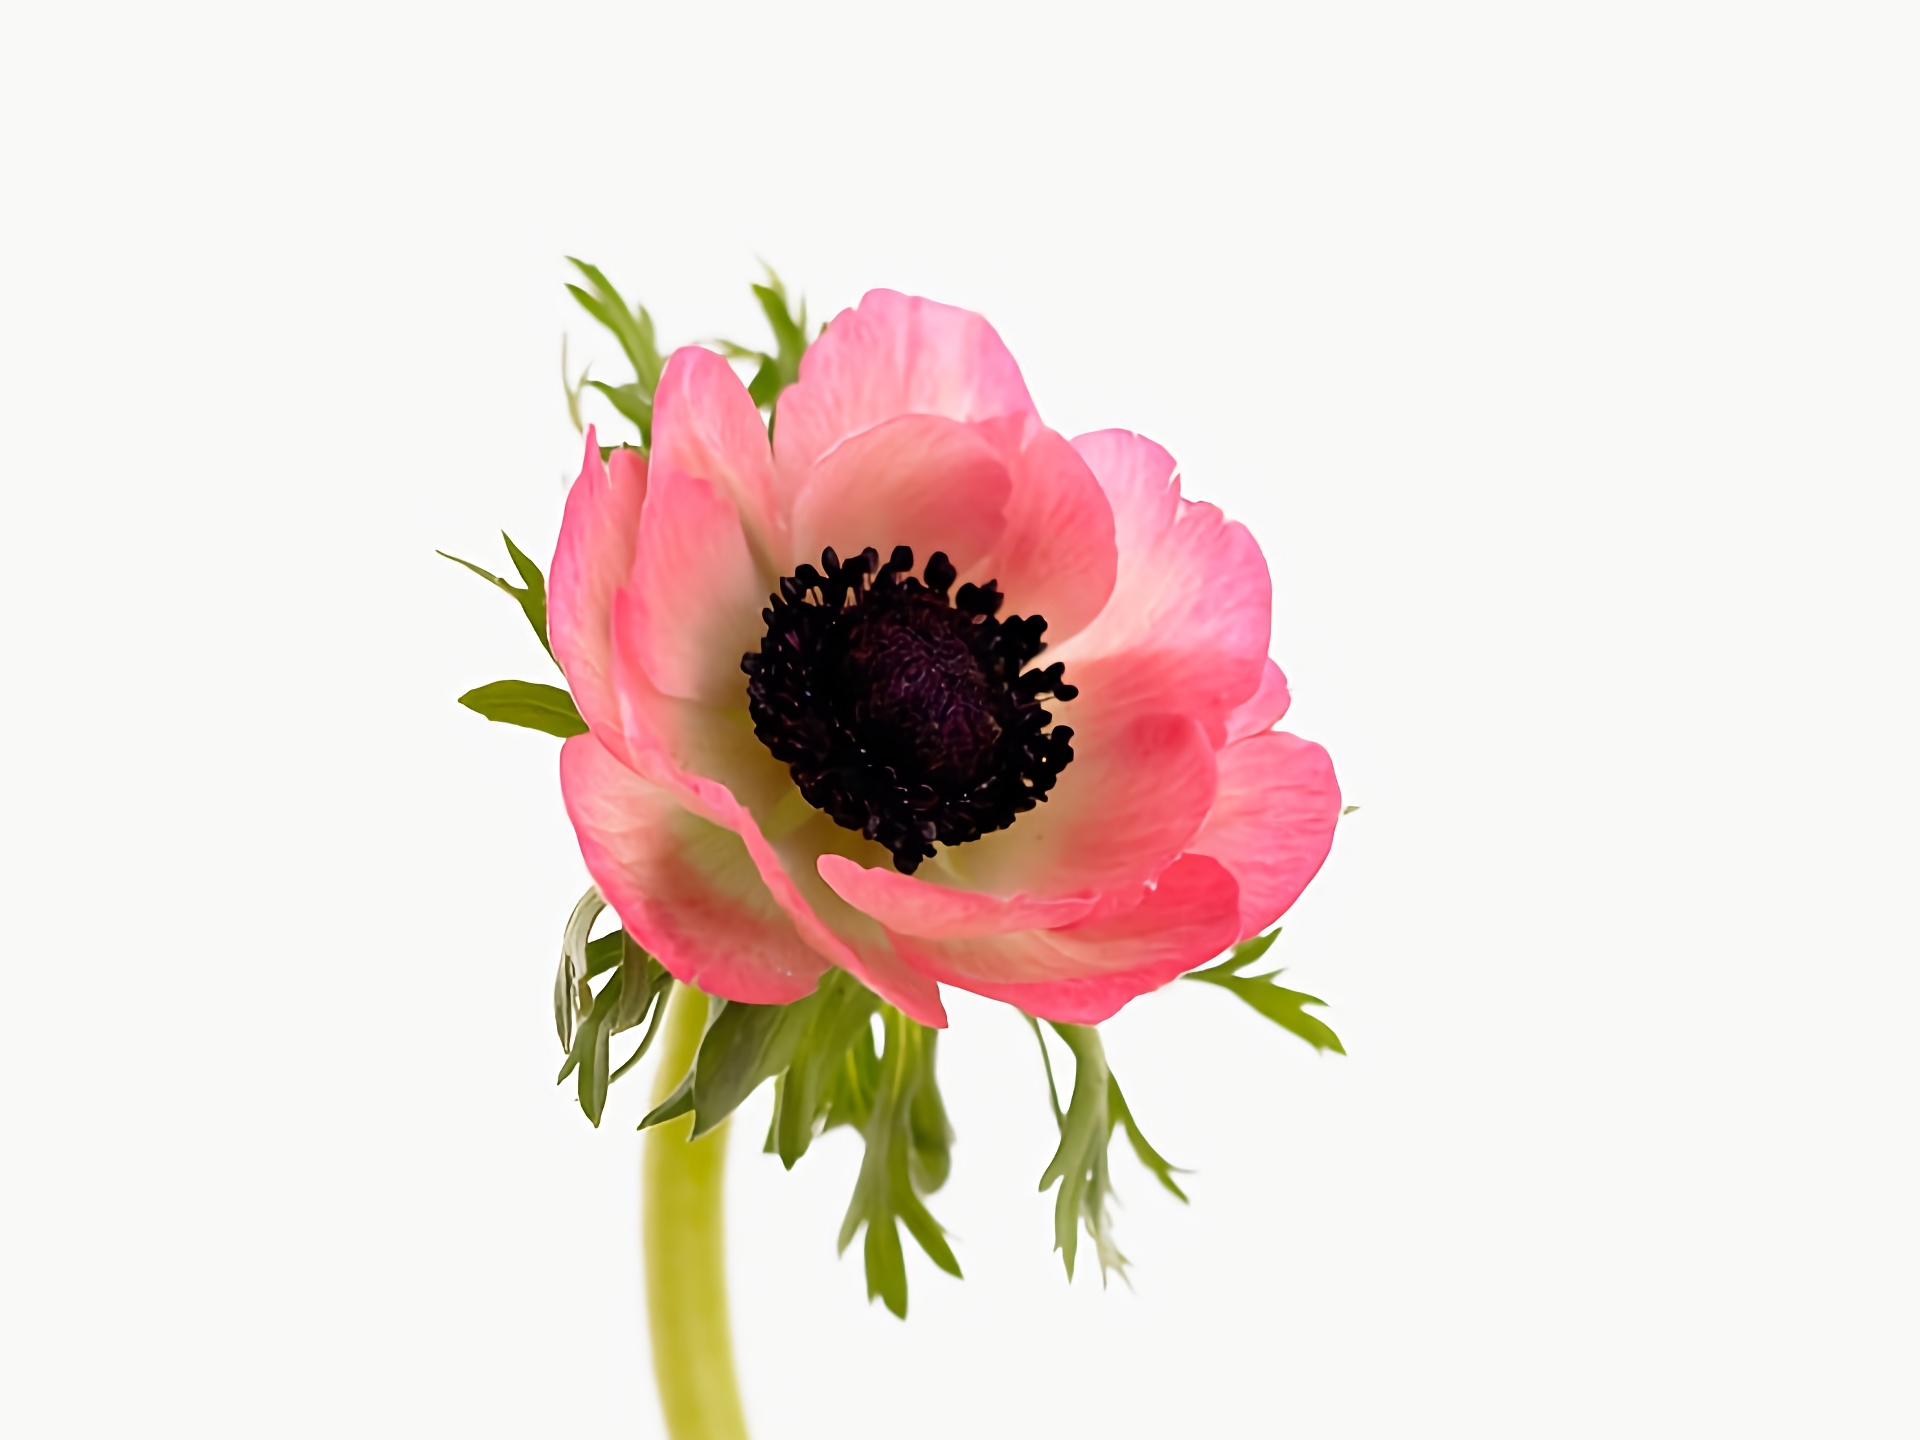 Earth Flower Anemone Close Up Pink Flower 1920x1440